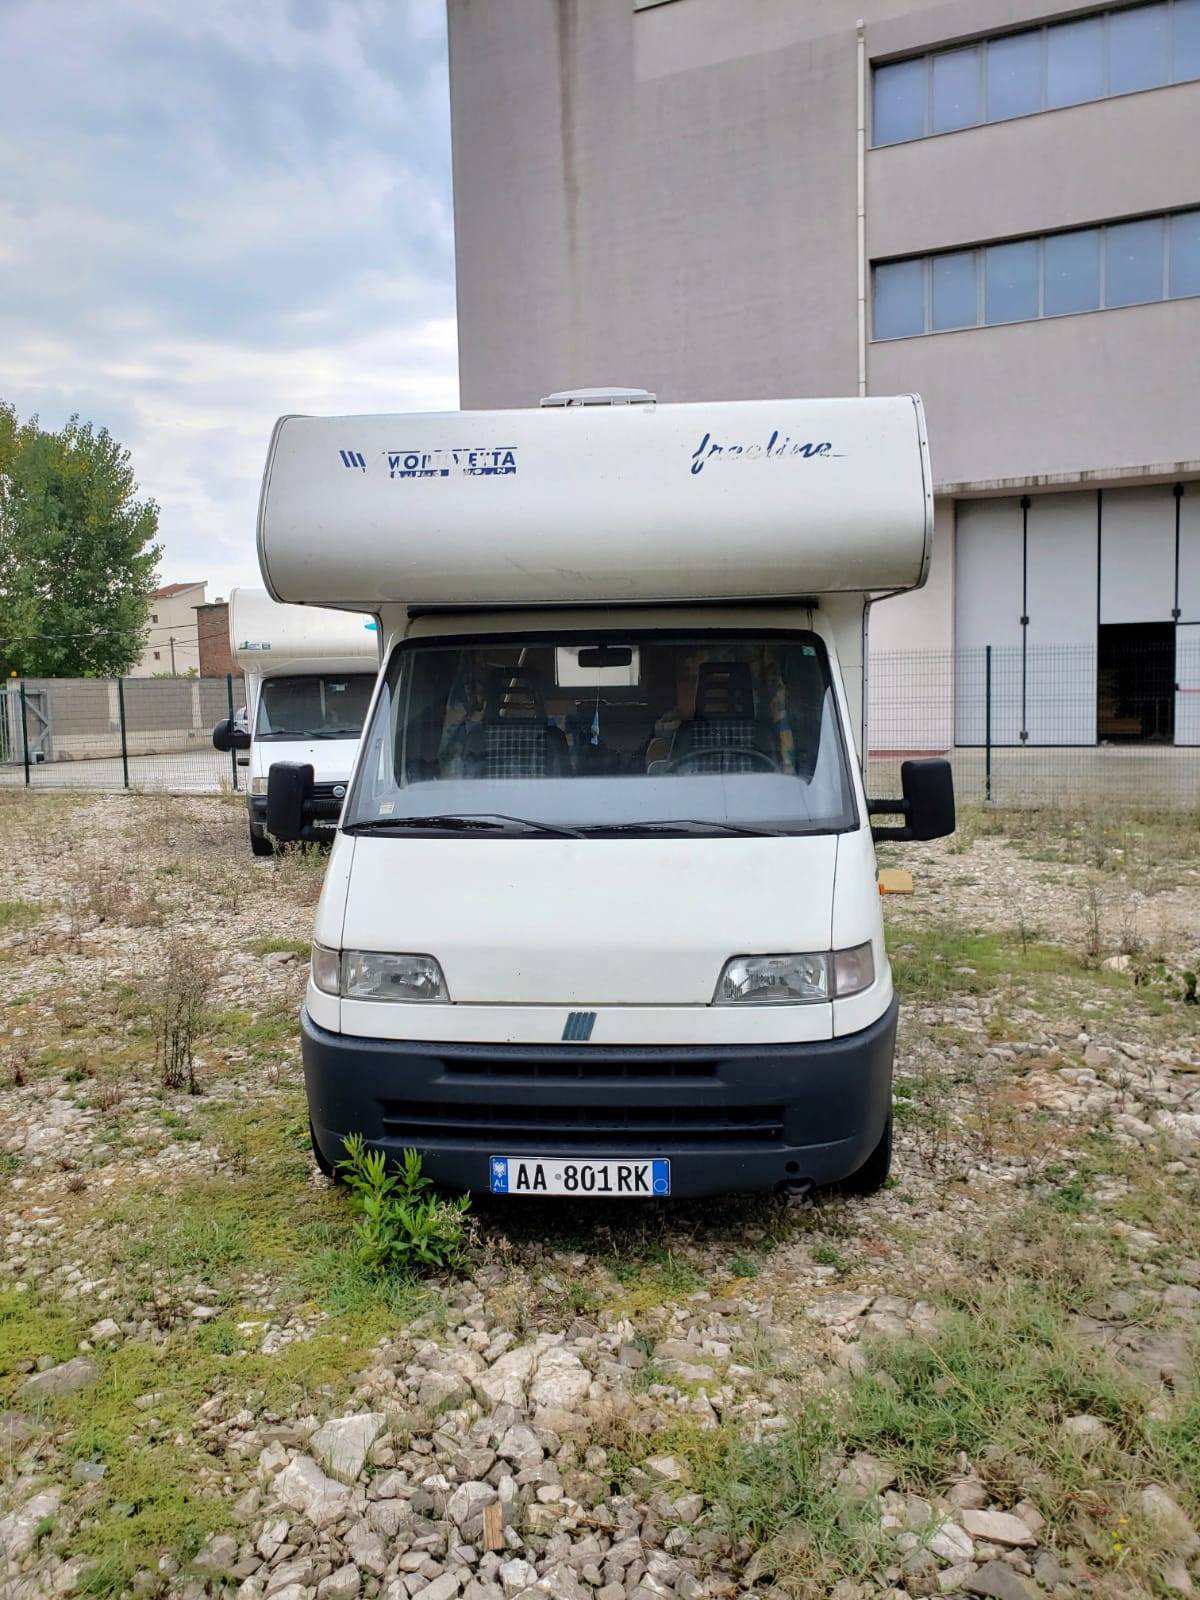 A Ducato Motorhome called Duena and for hire in Durrës, Albania